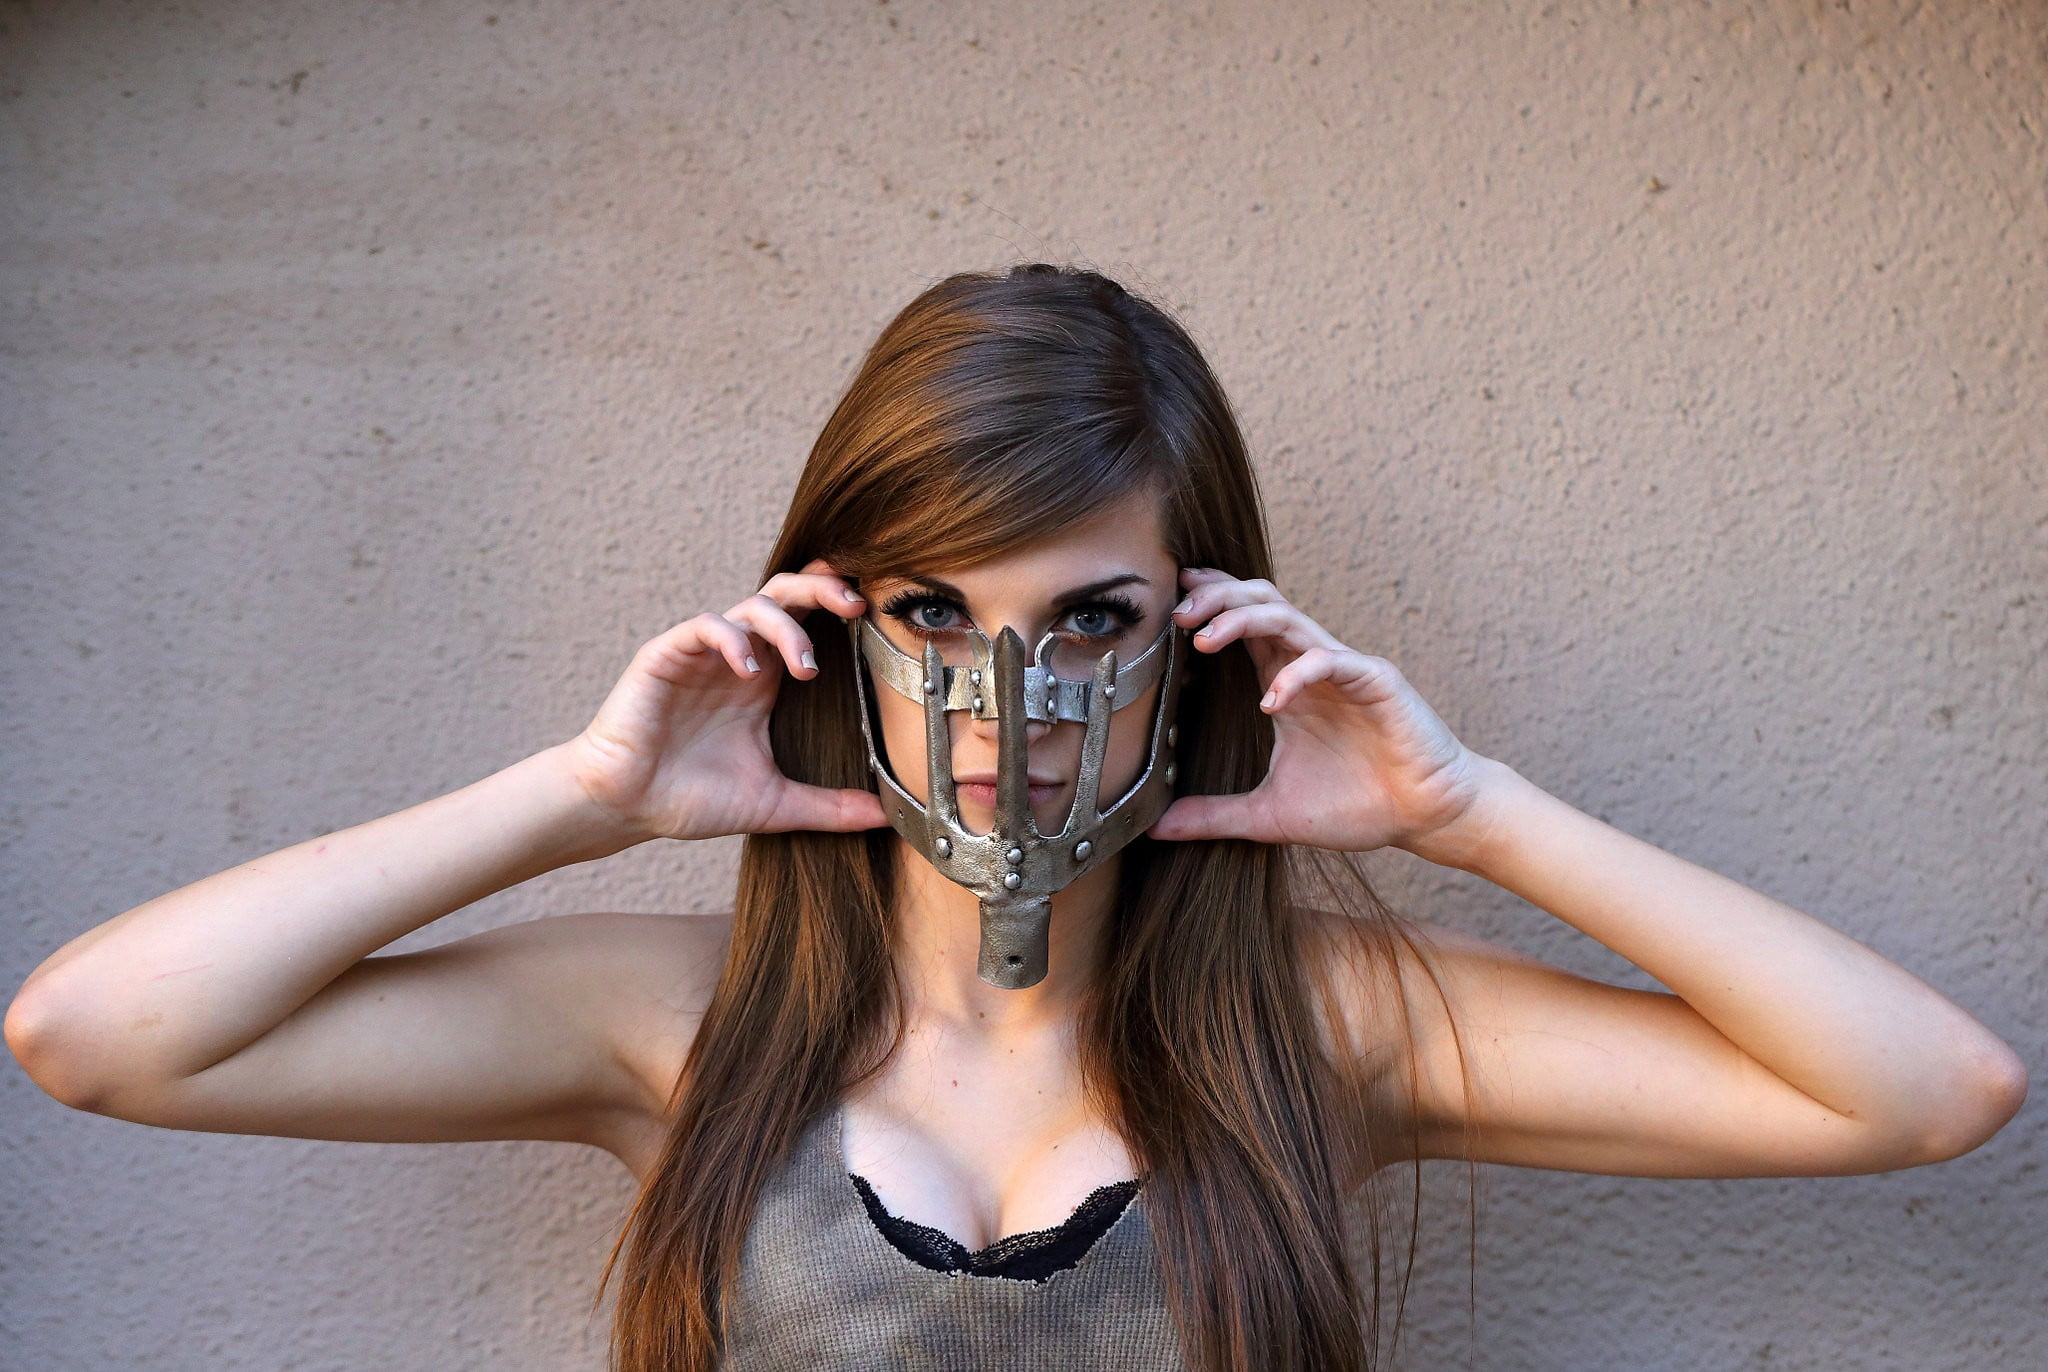 women's gray sleeveless top and gray metal mask, cosplay, Mad Max: Fury Road